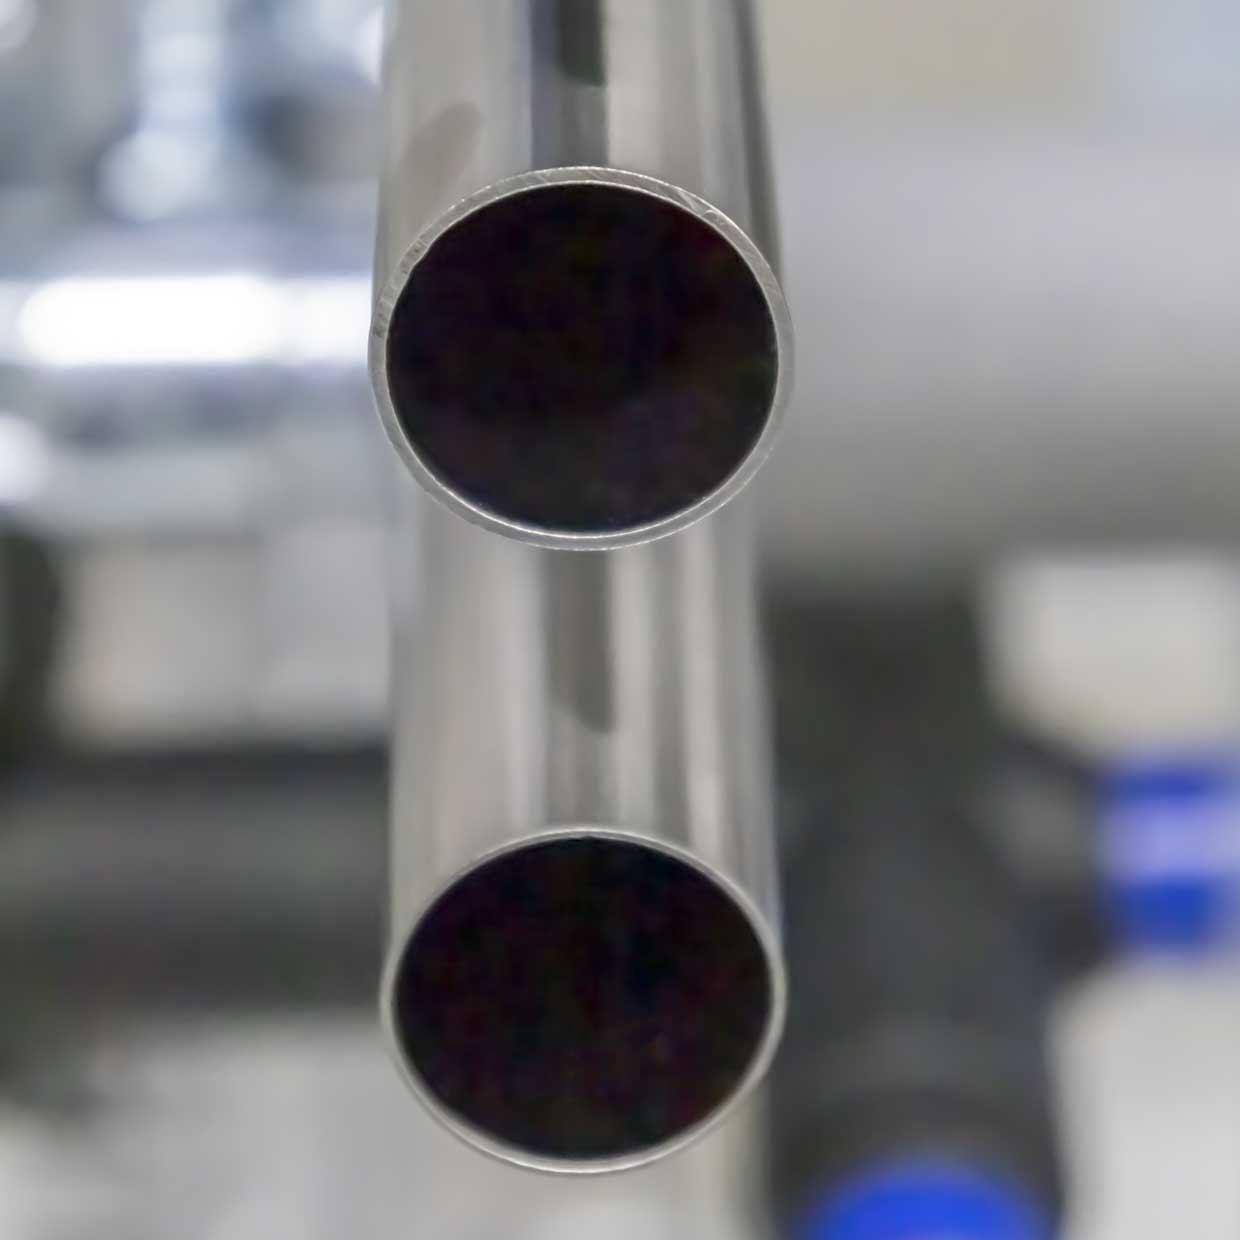 Two SUS steel pipes with smooth surface similar to stainless steel